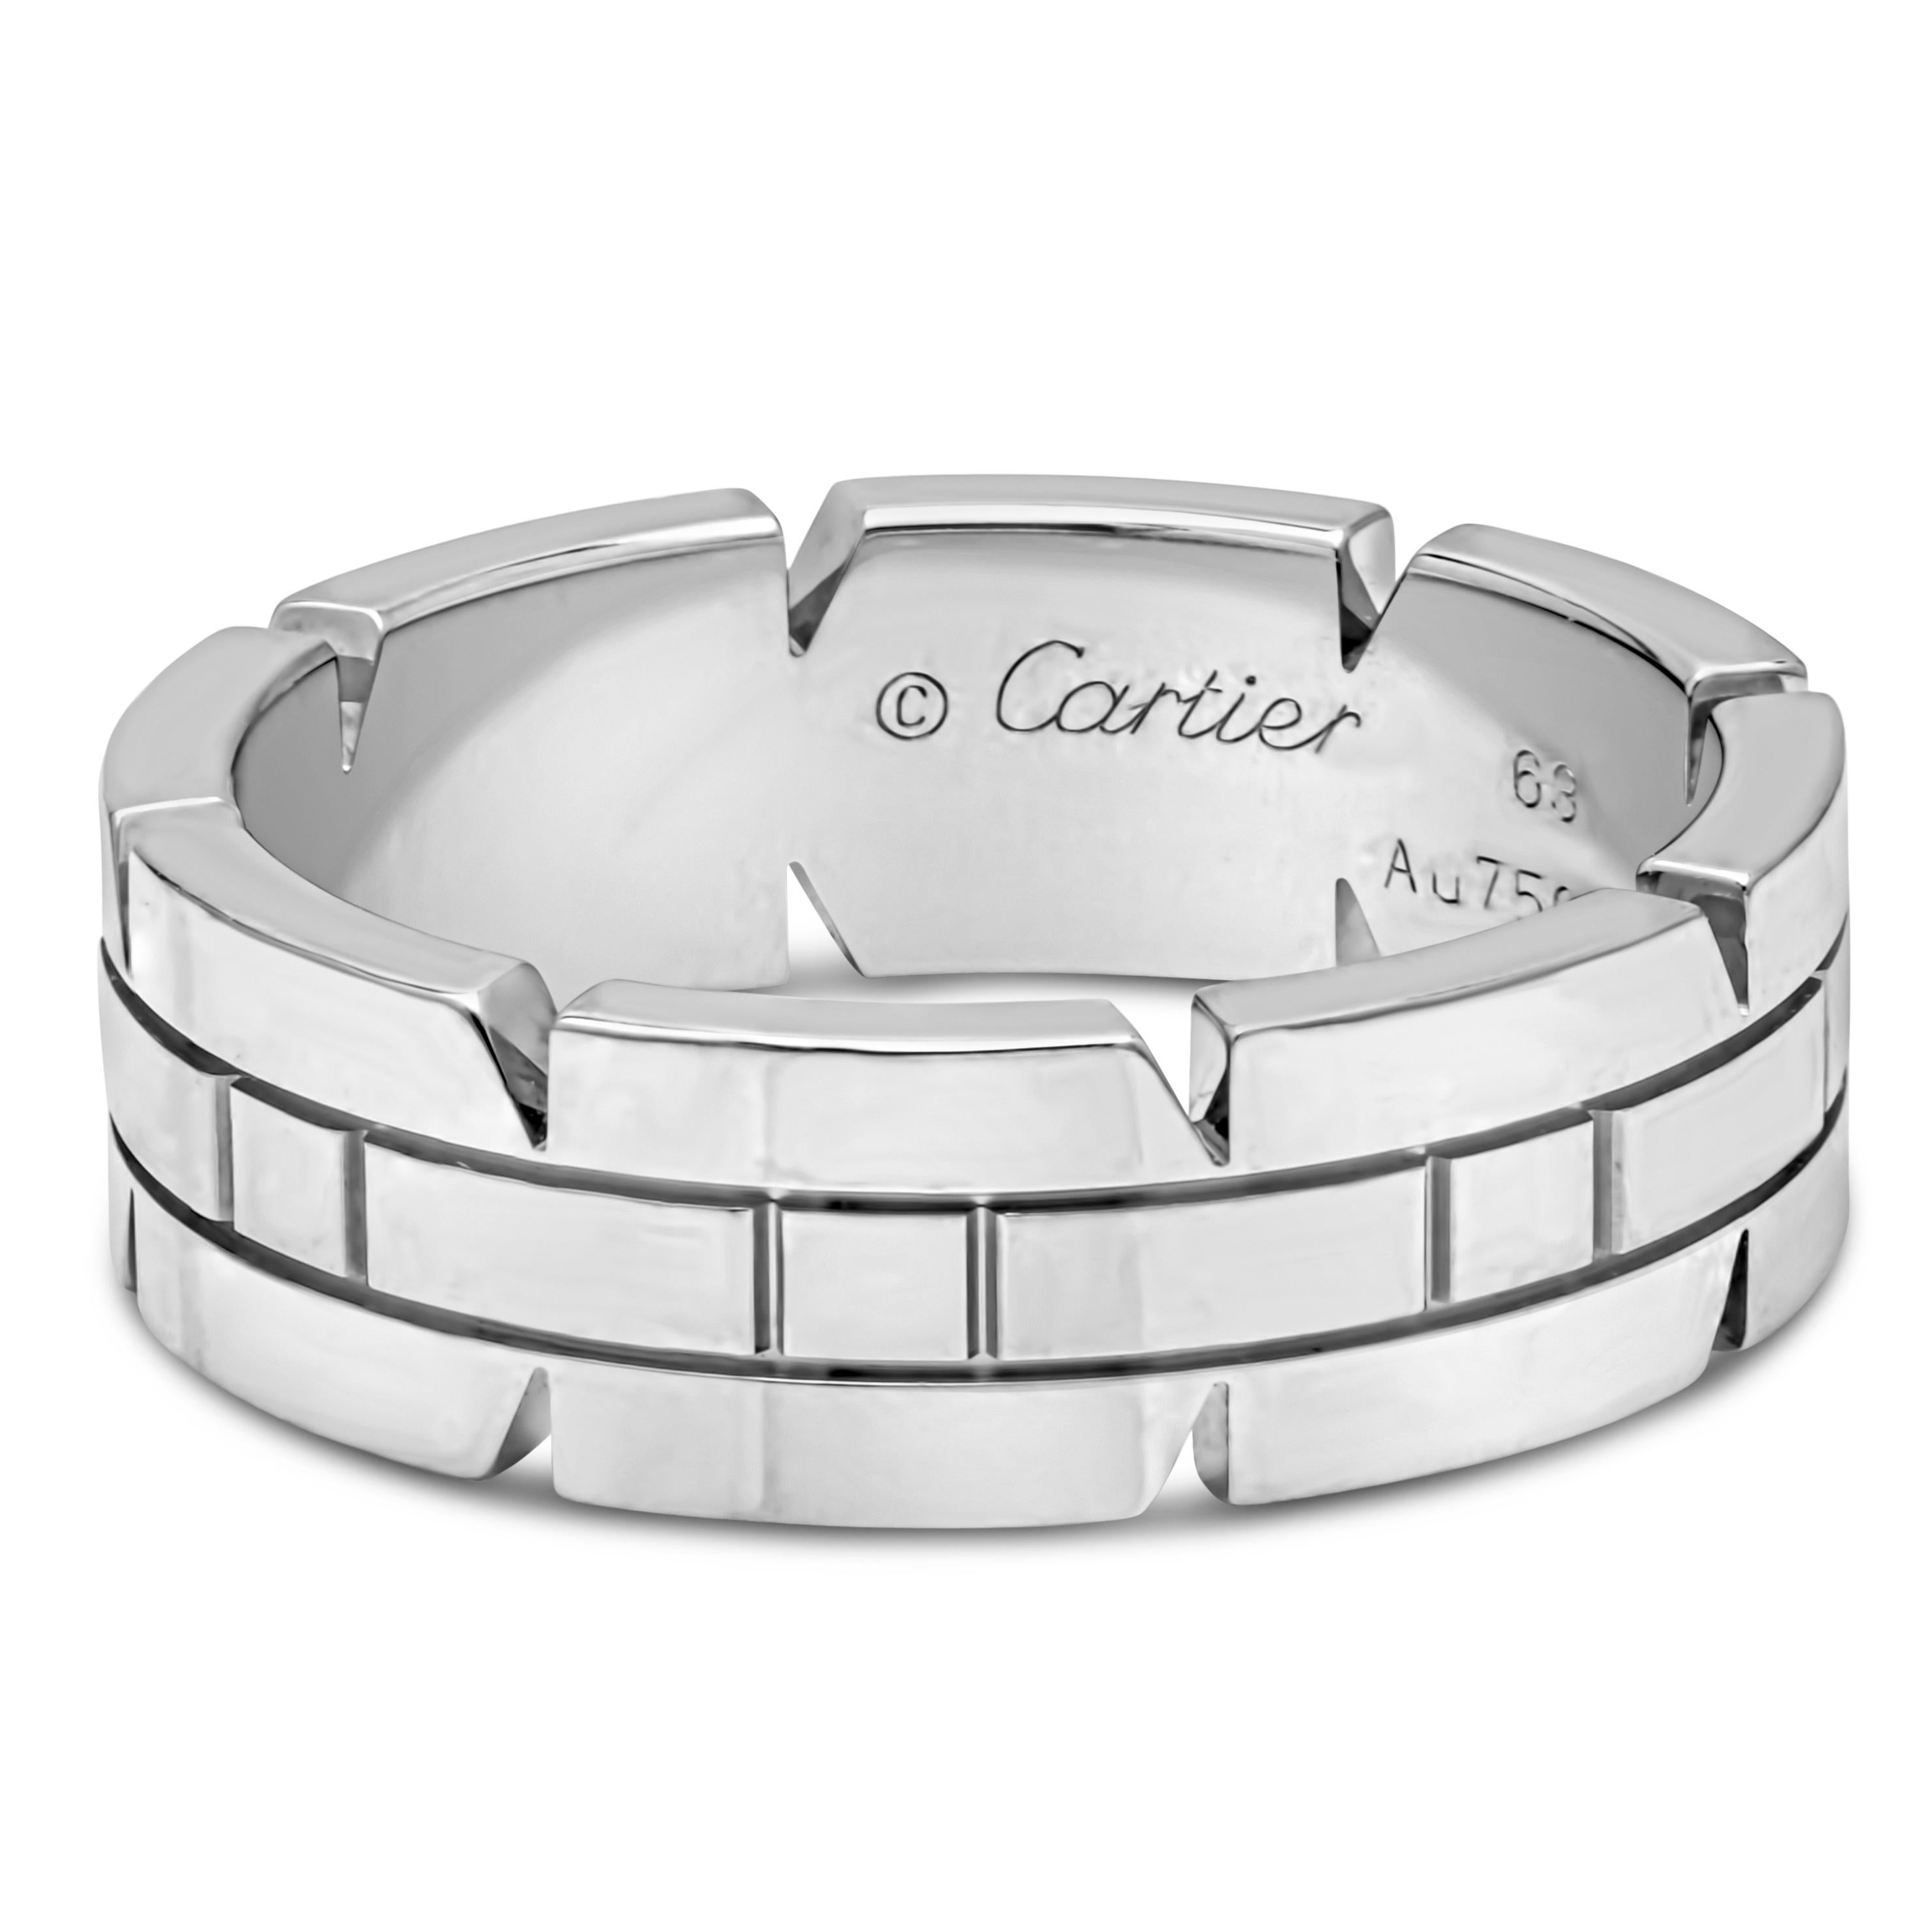 An authentic men's wedding band ring by Cartier from the Tank Française collection. Crafted in 18K white gold with a fine polished finish, 7 mm in width. Size 10.5 US.
